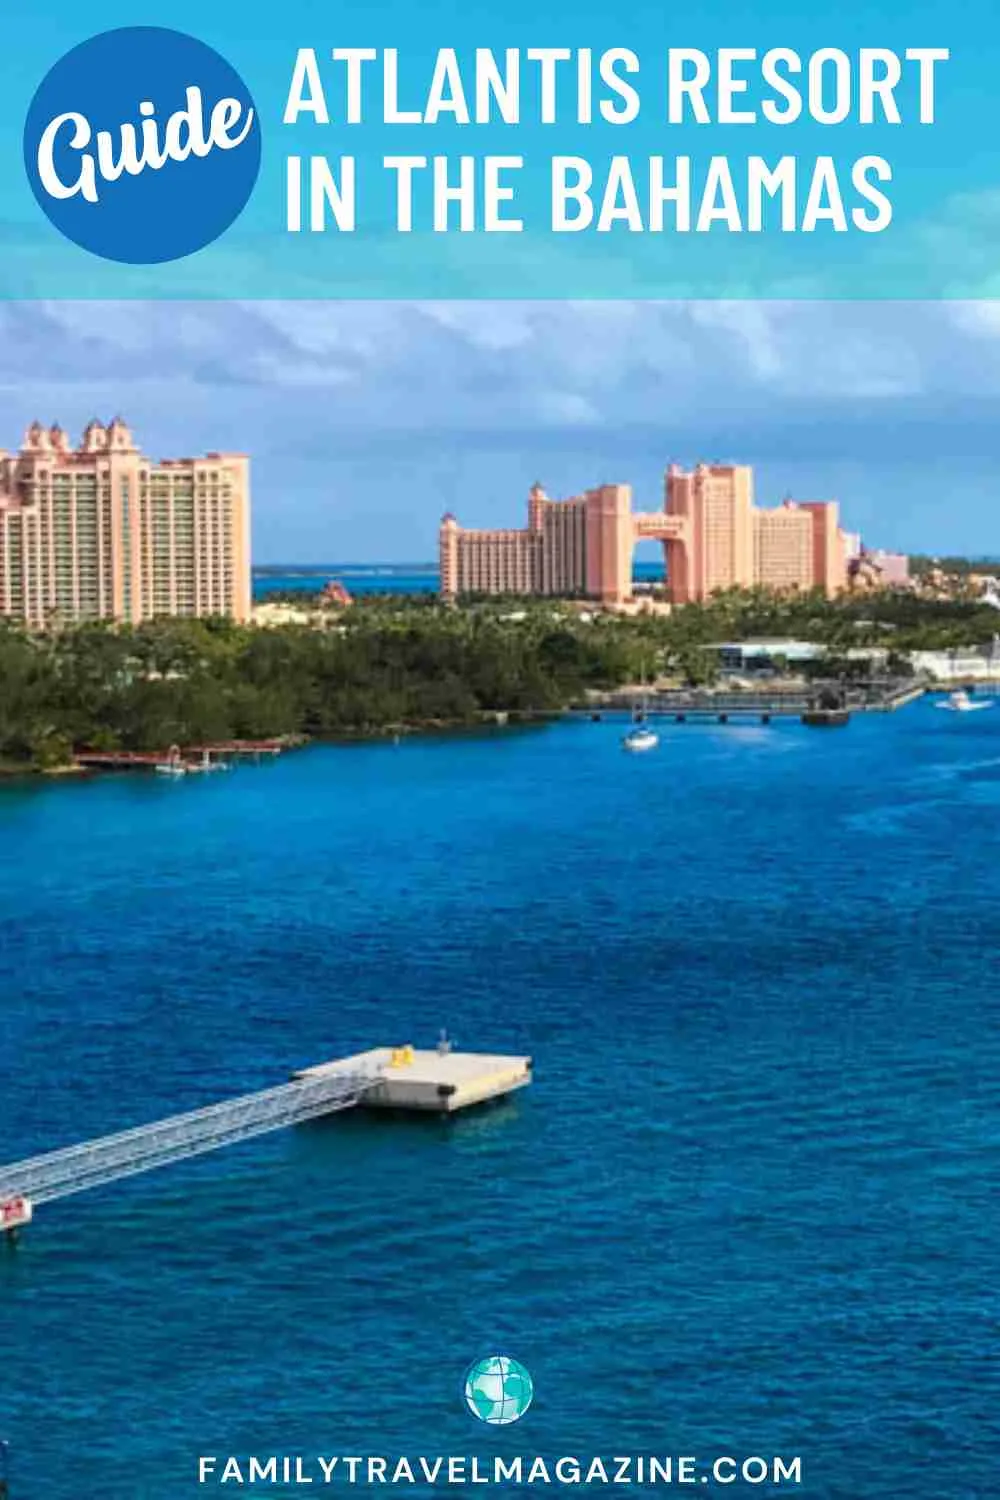 A review of Atlantis Resort - Bahamas as a family vacation destination. Tips and ideas for rooms, dining, activities, excursions, and more while traveling with kids!